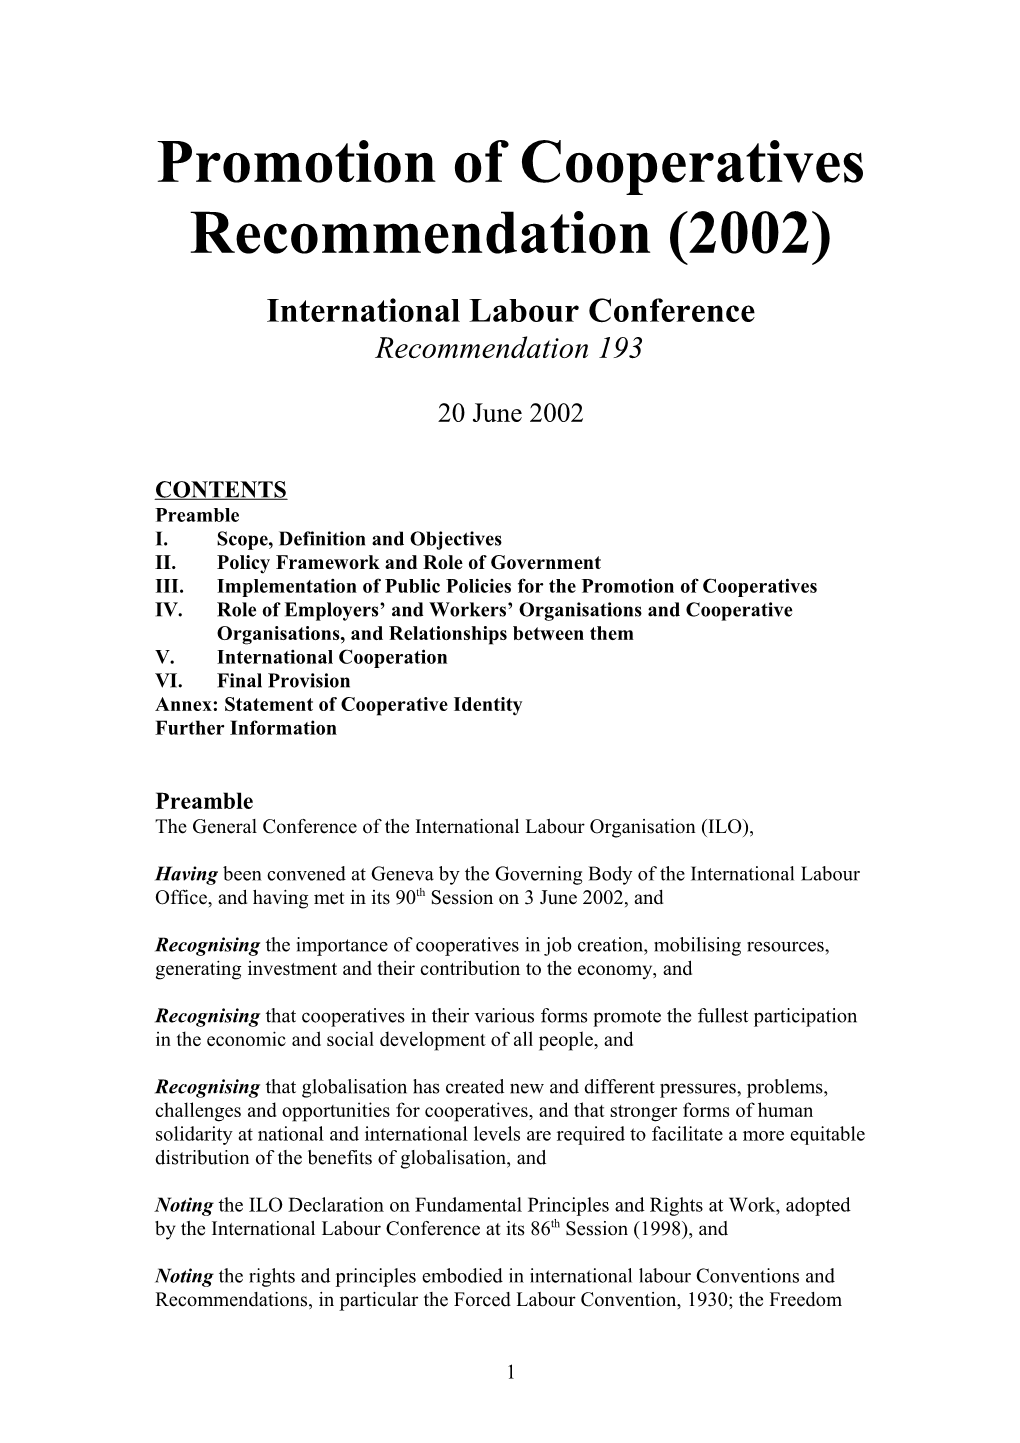 Promotion of Cooperatives Recommendation (2002)